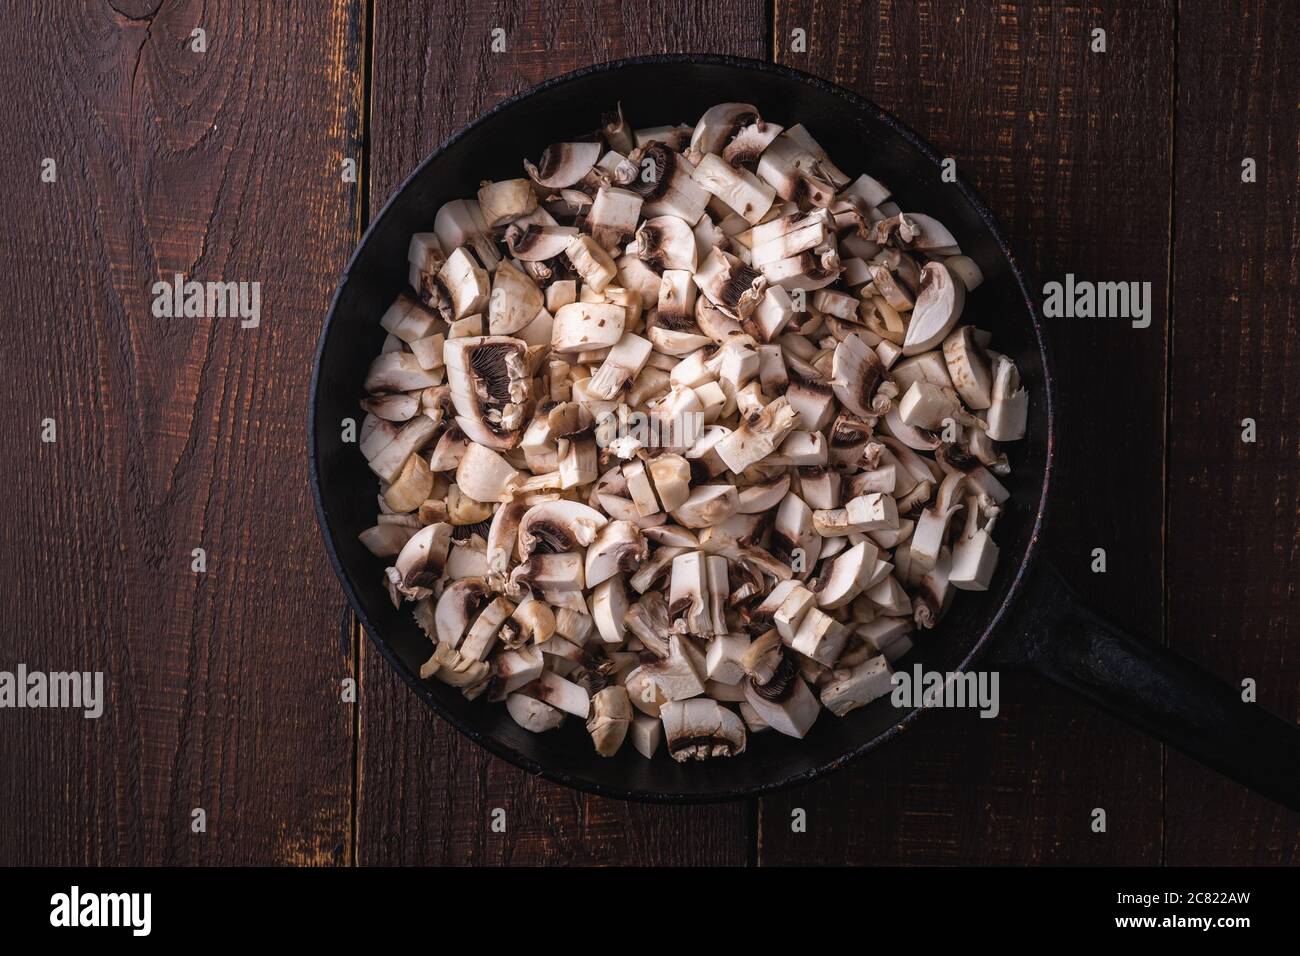 Tasty chopped champignon mushrooms in frying pan, uncooked food sliced, dark brown wooden background, top view Stock Photo